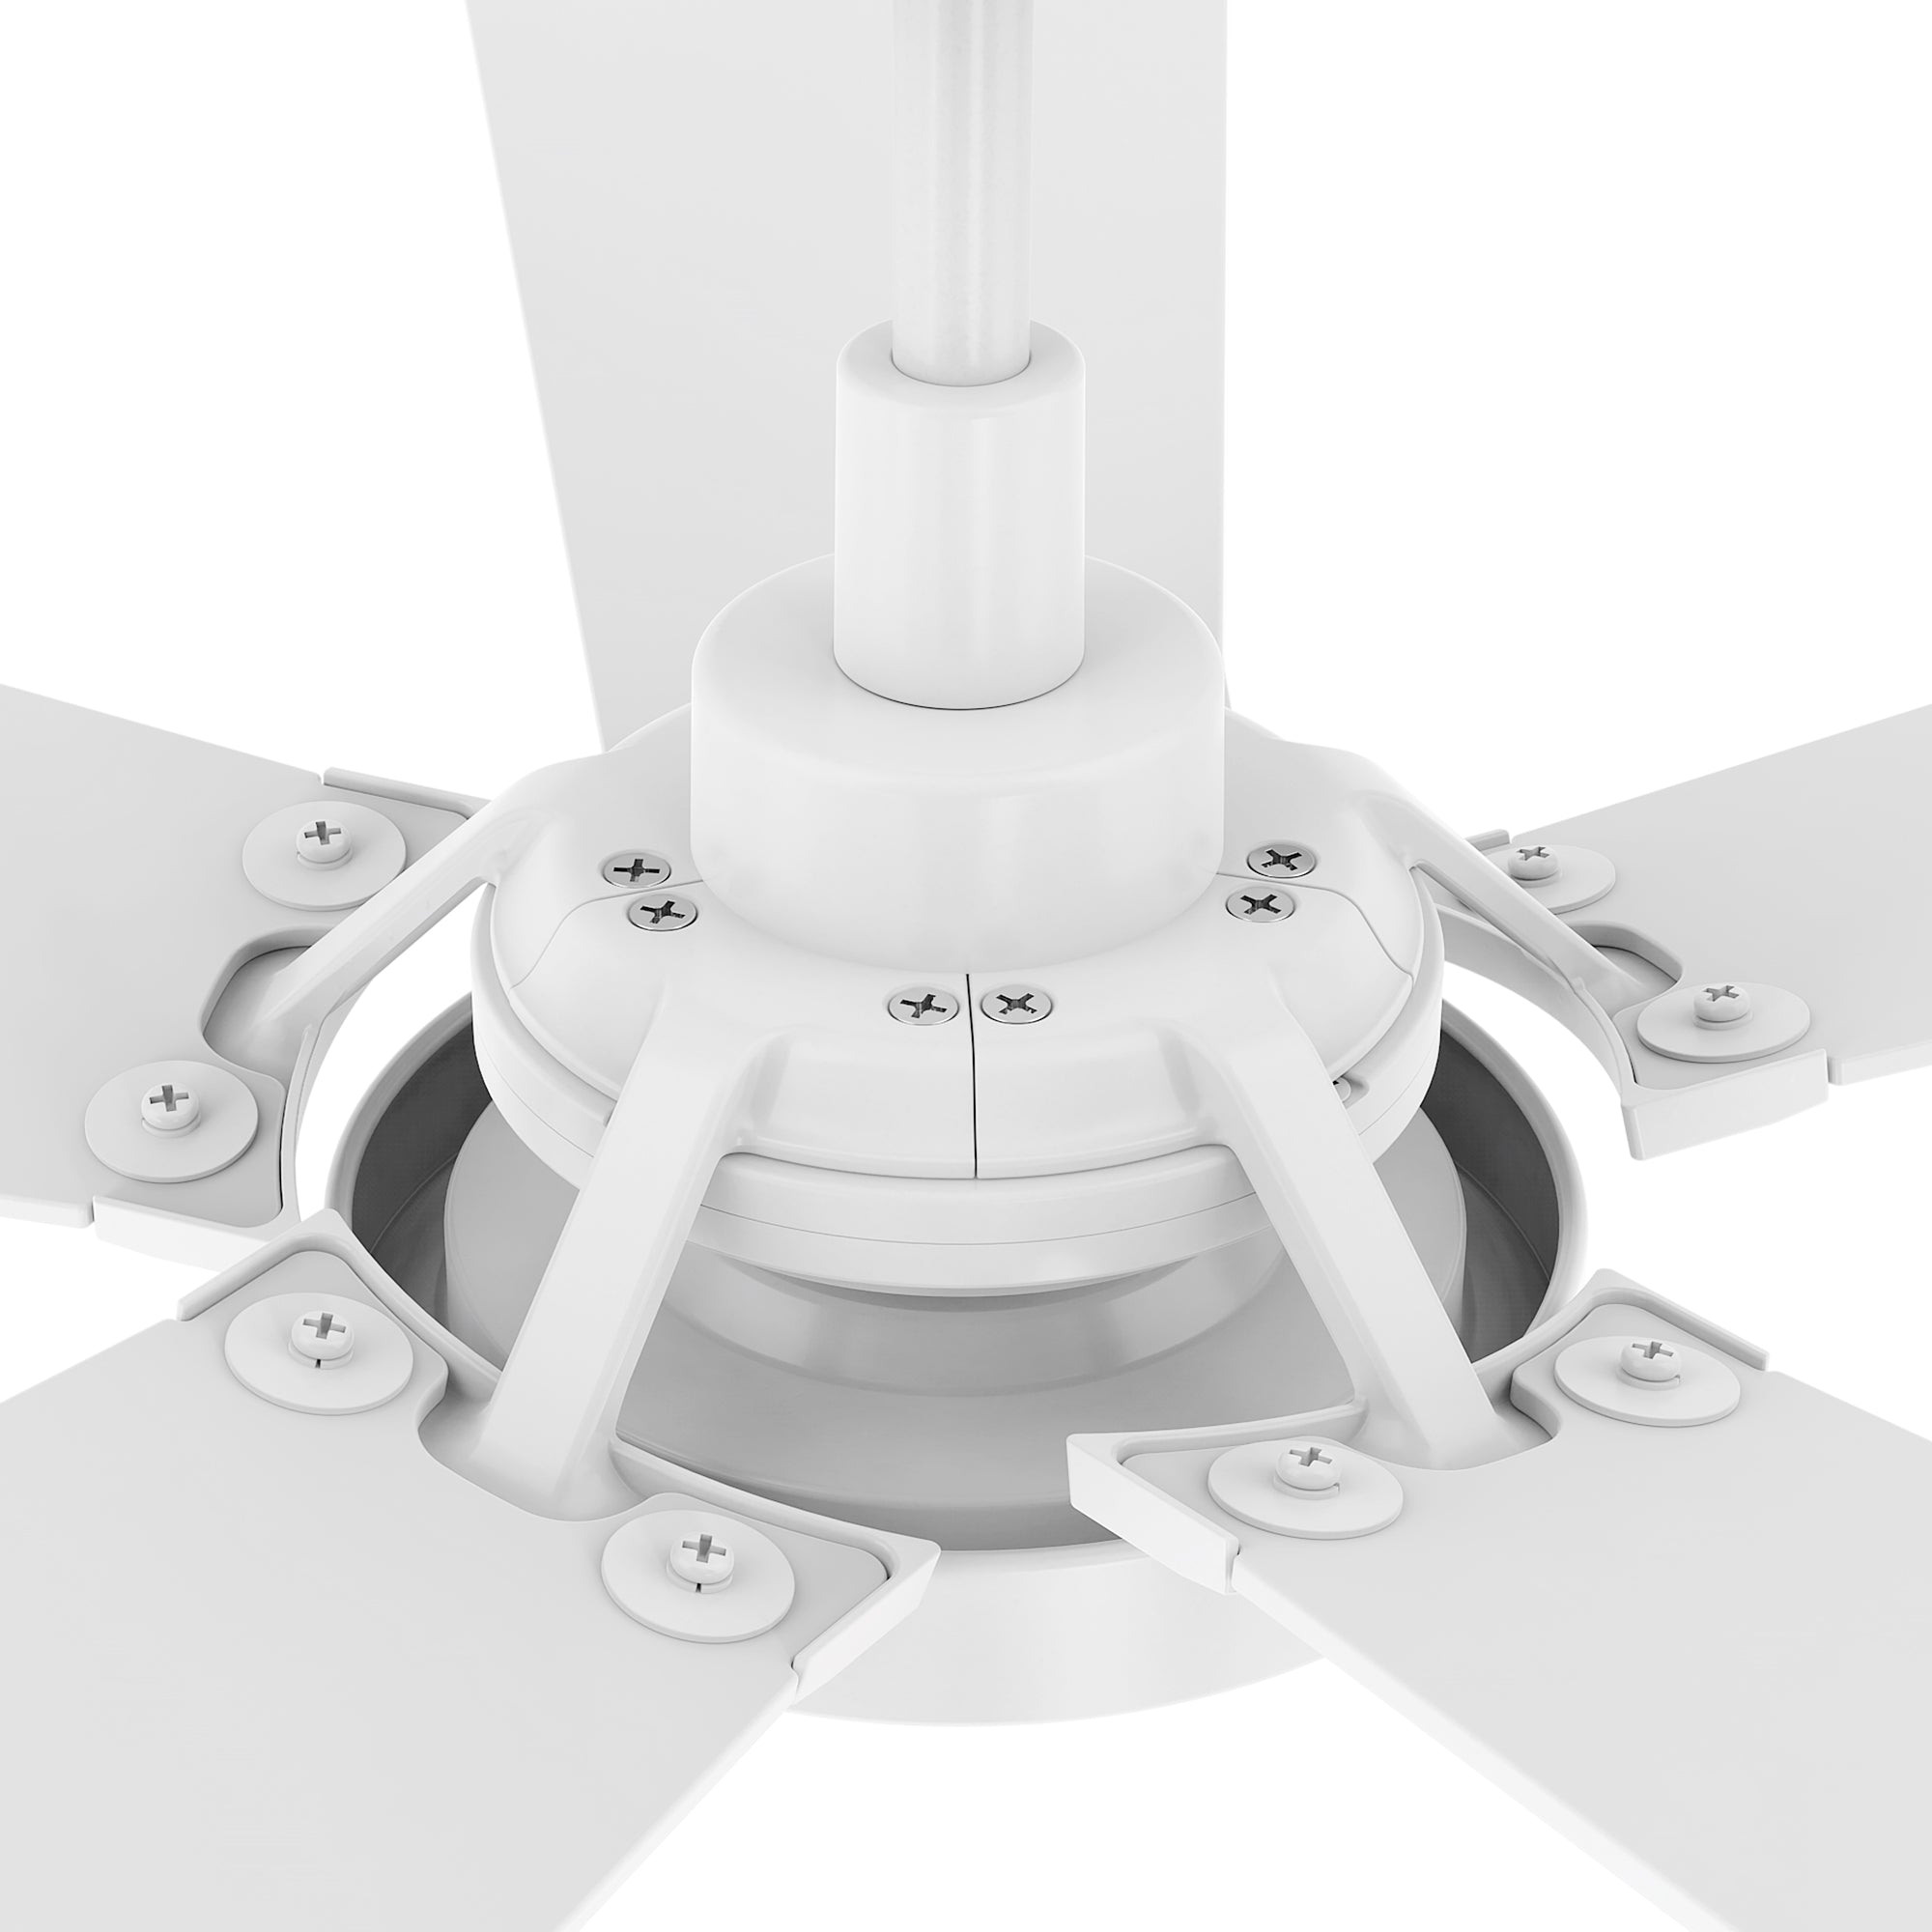 This Wilkes 52&#39;&#39; smart ceiling fan keeps your space cool, bright, and stylish. It is a soft modern masterpiece perfect for your large indoor living spaces. This Wifi smart ceiling fan is a simplicity designing with White finish, use elegant Plywood blades, Glass shade and has an integrated 4000K LED cool light. The fan features Remote control, Wi-Fi apps, Siri Shortcut and Voice control technology (compatible with Amazon Alexa and Google Home Assistant ) to set fan preferences.